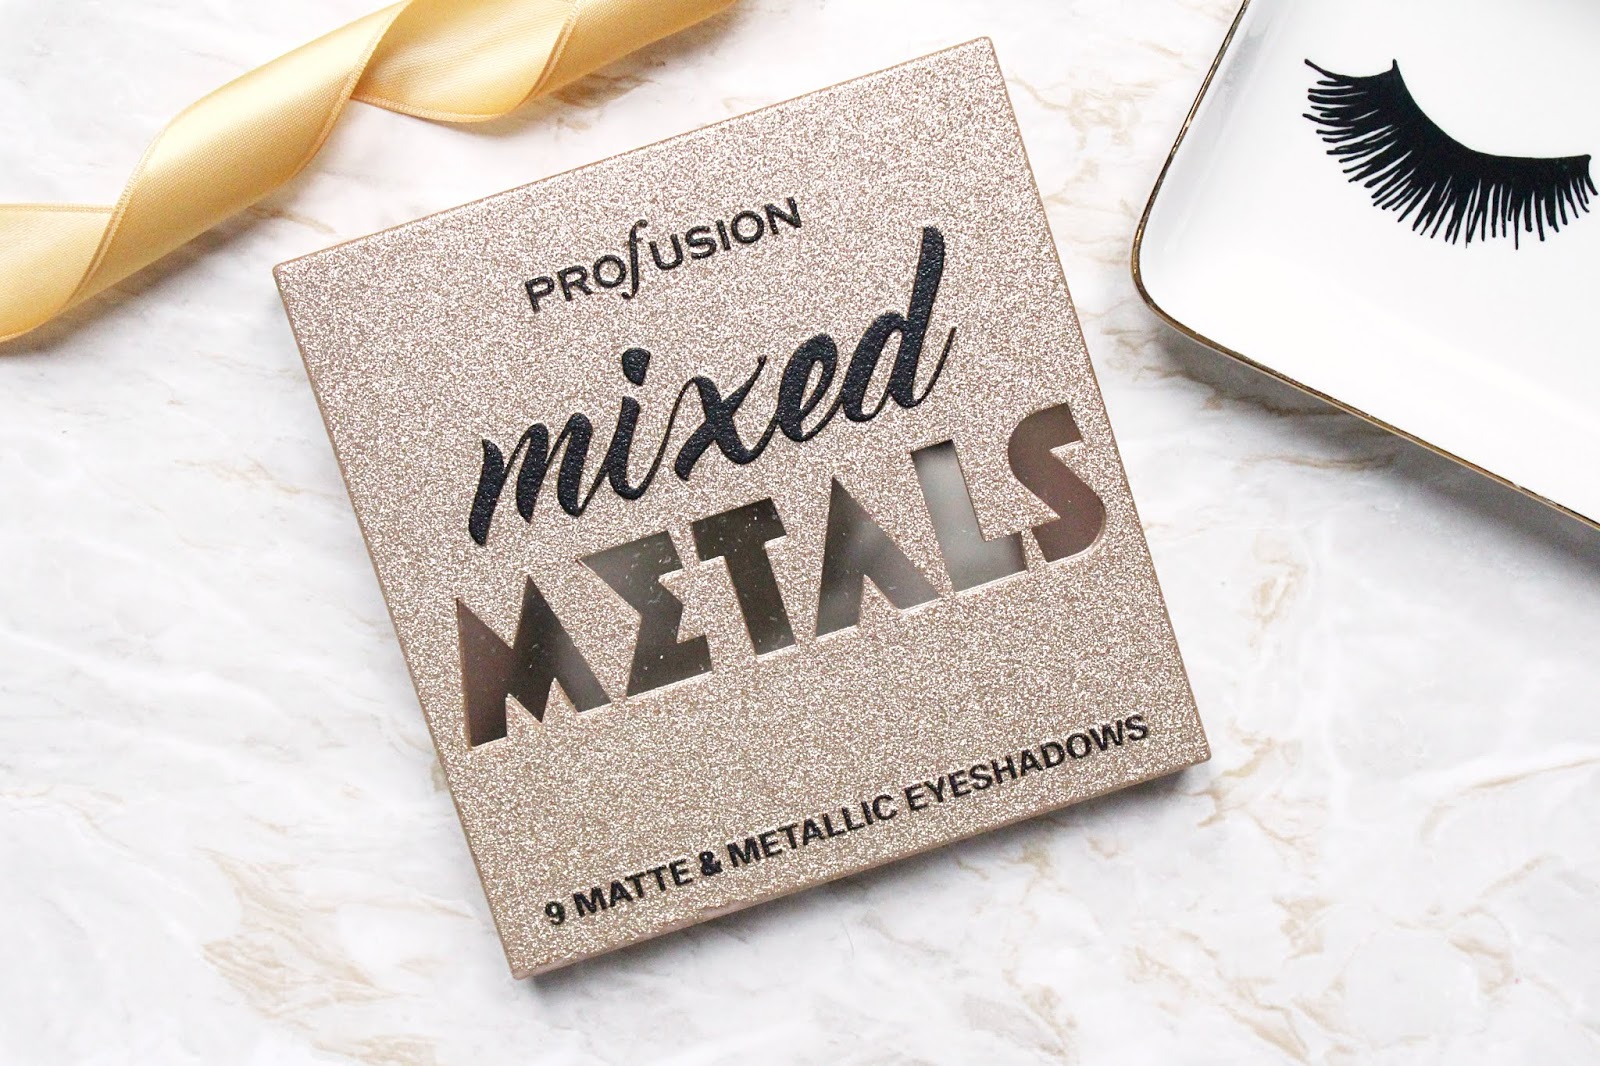 Profusion Mixed Metals Nude Palette Review